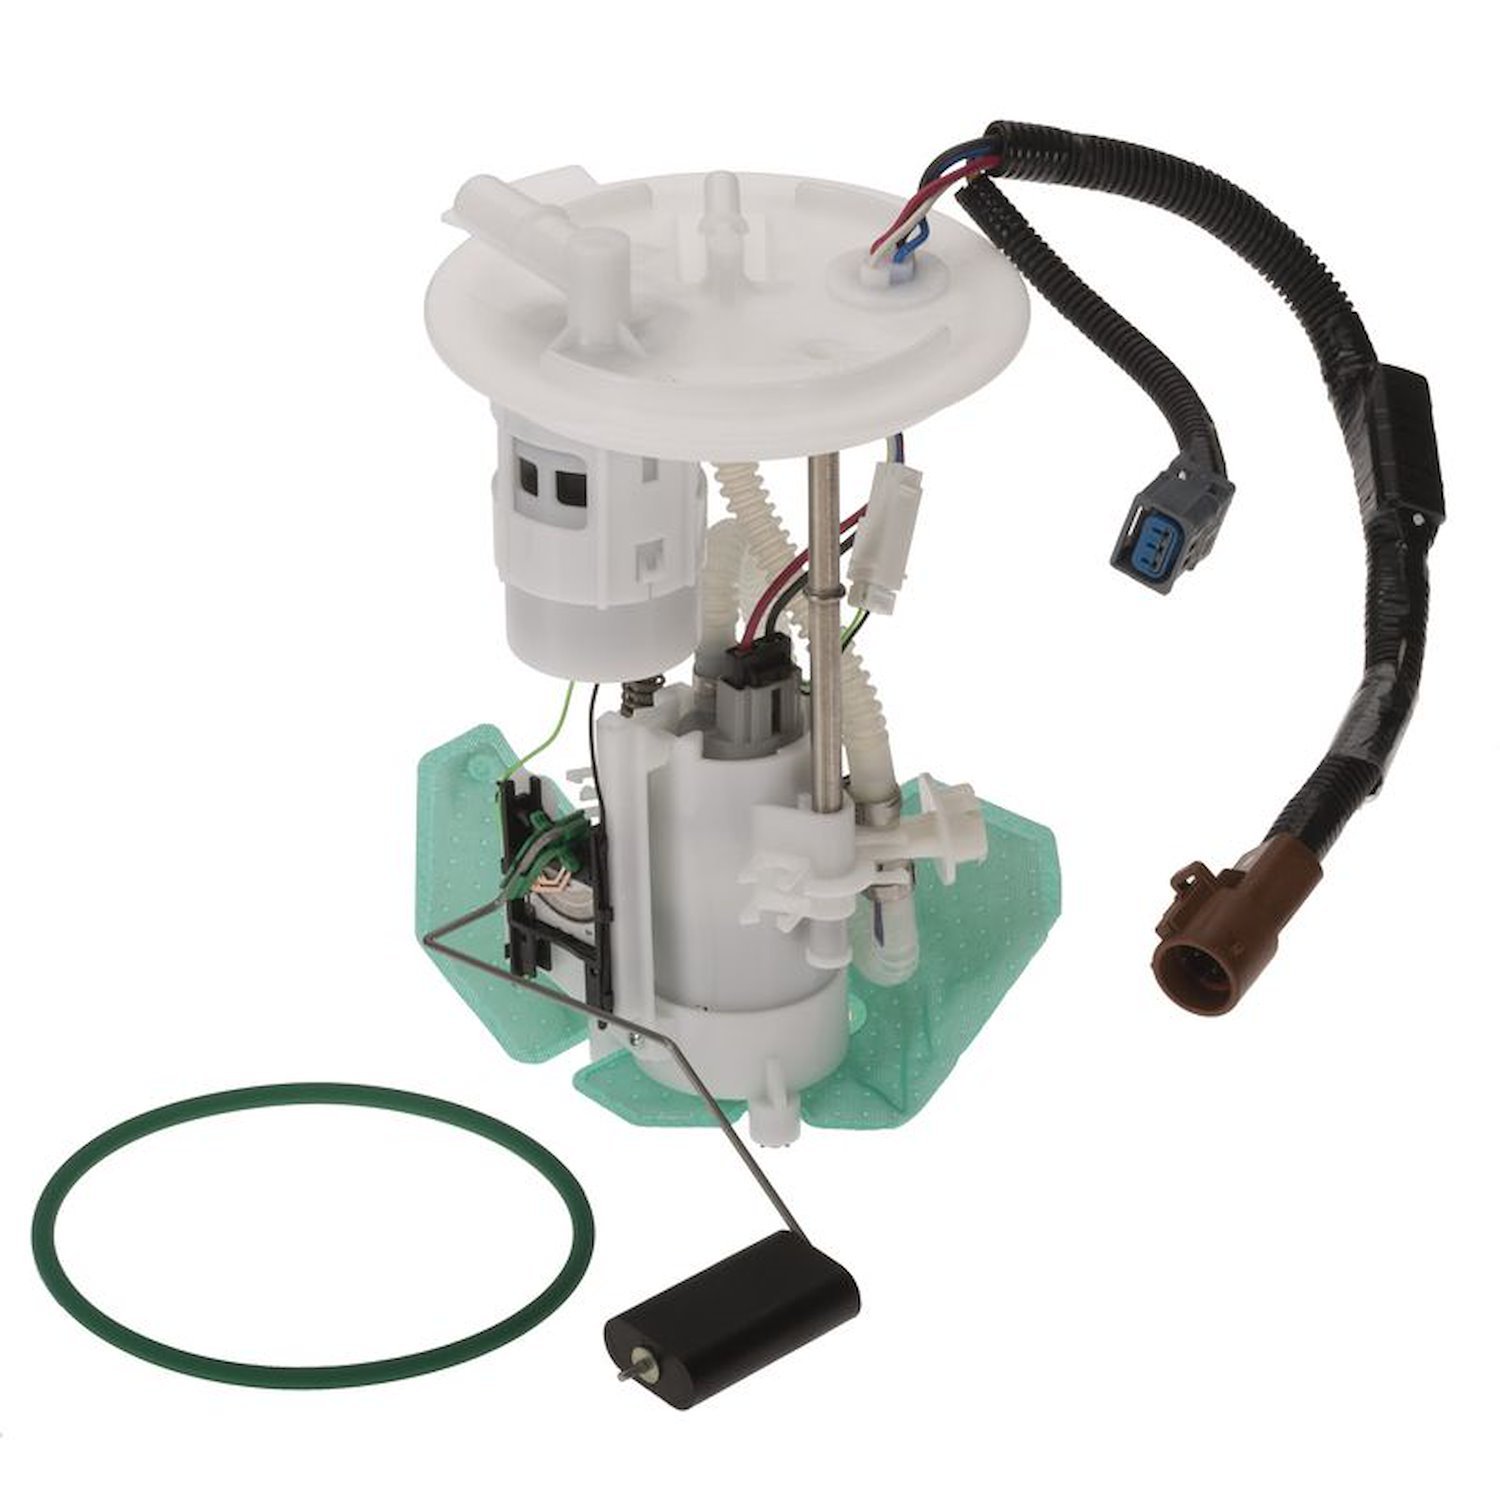 OE Ford Replacement Fuel Pump Module Assembly for 2004-2005 Ford Explorer/Mercury Mountaineer